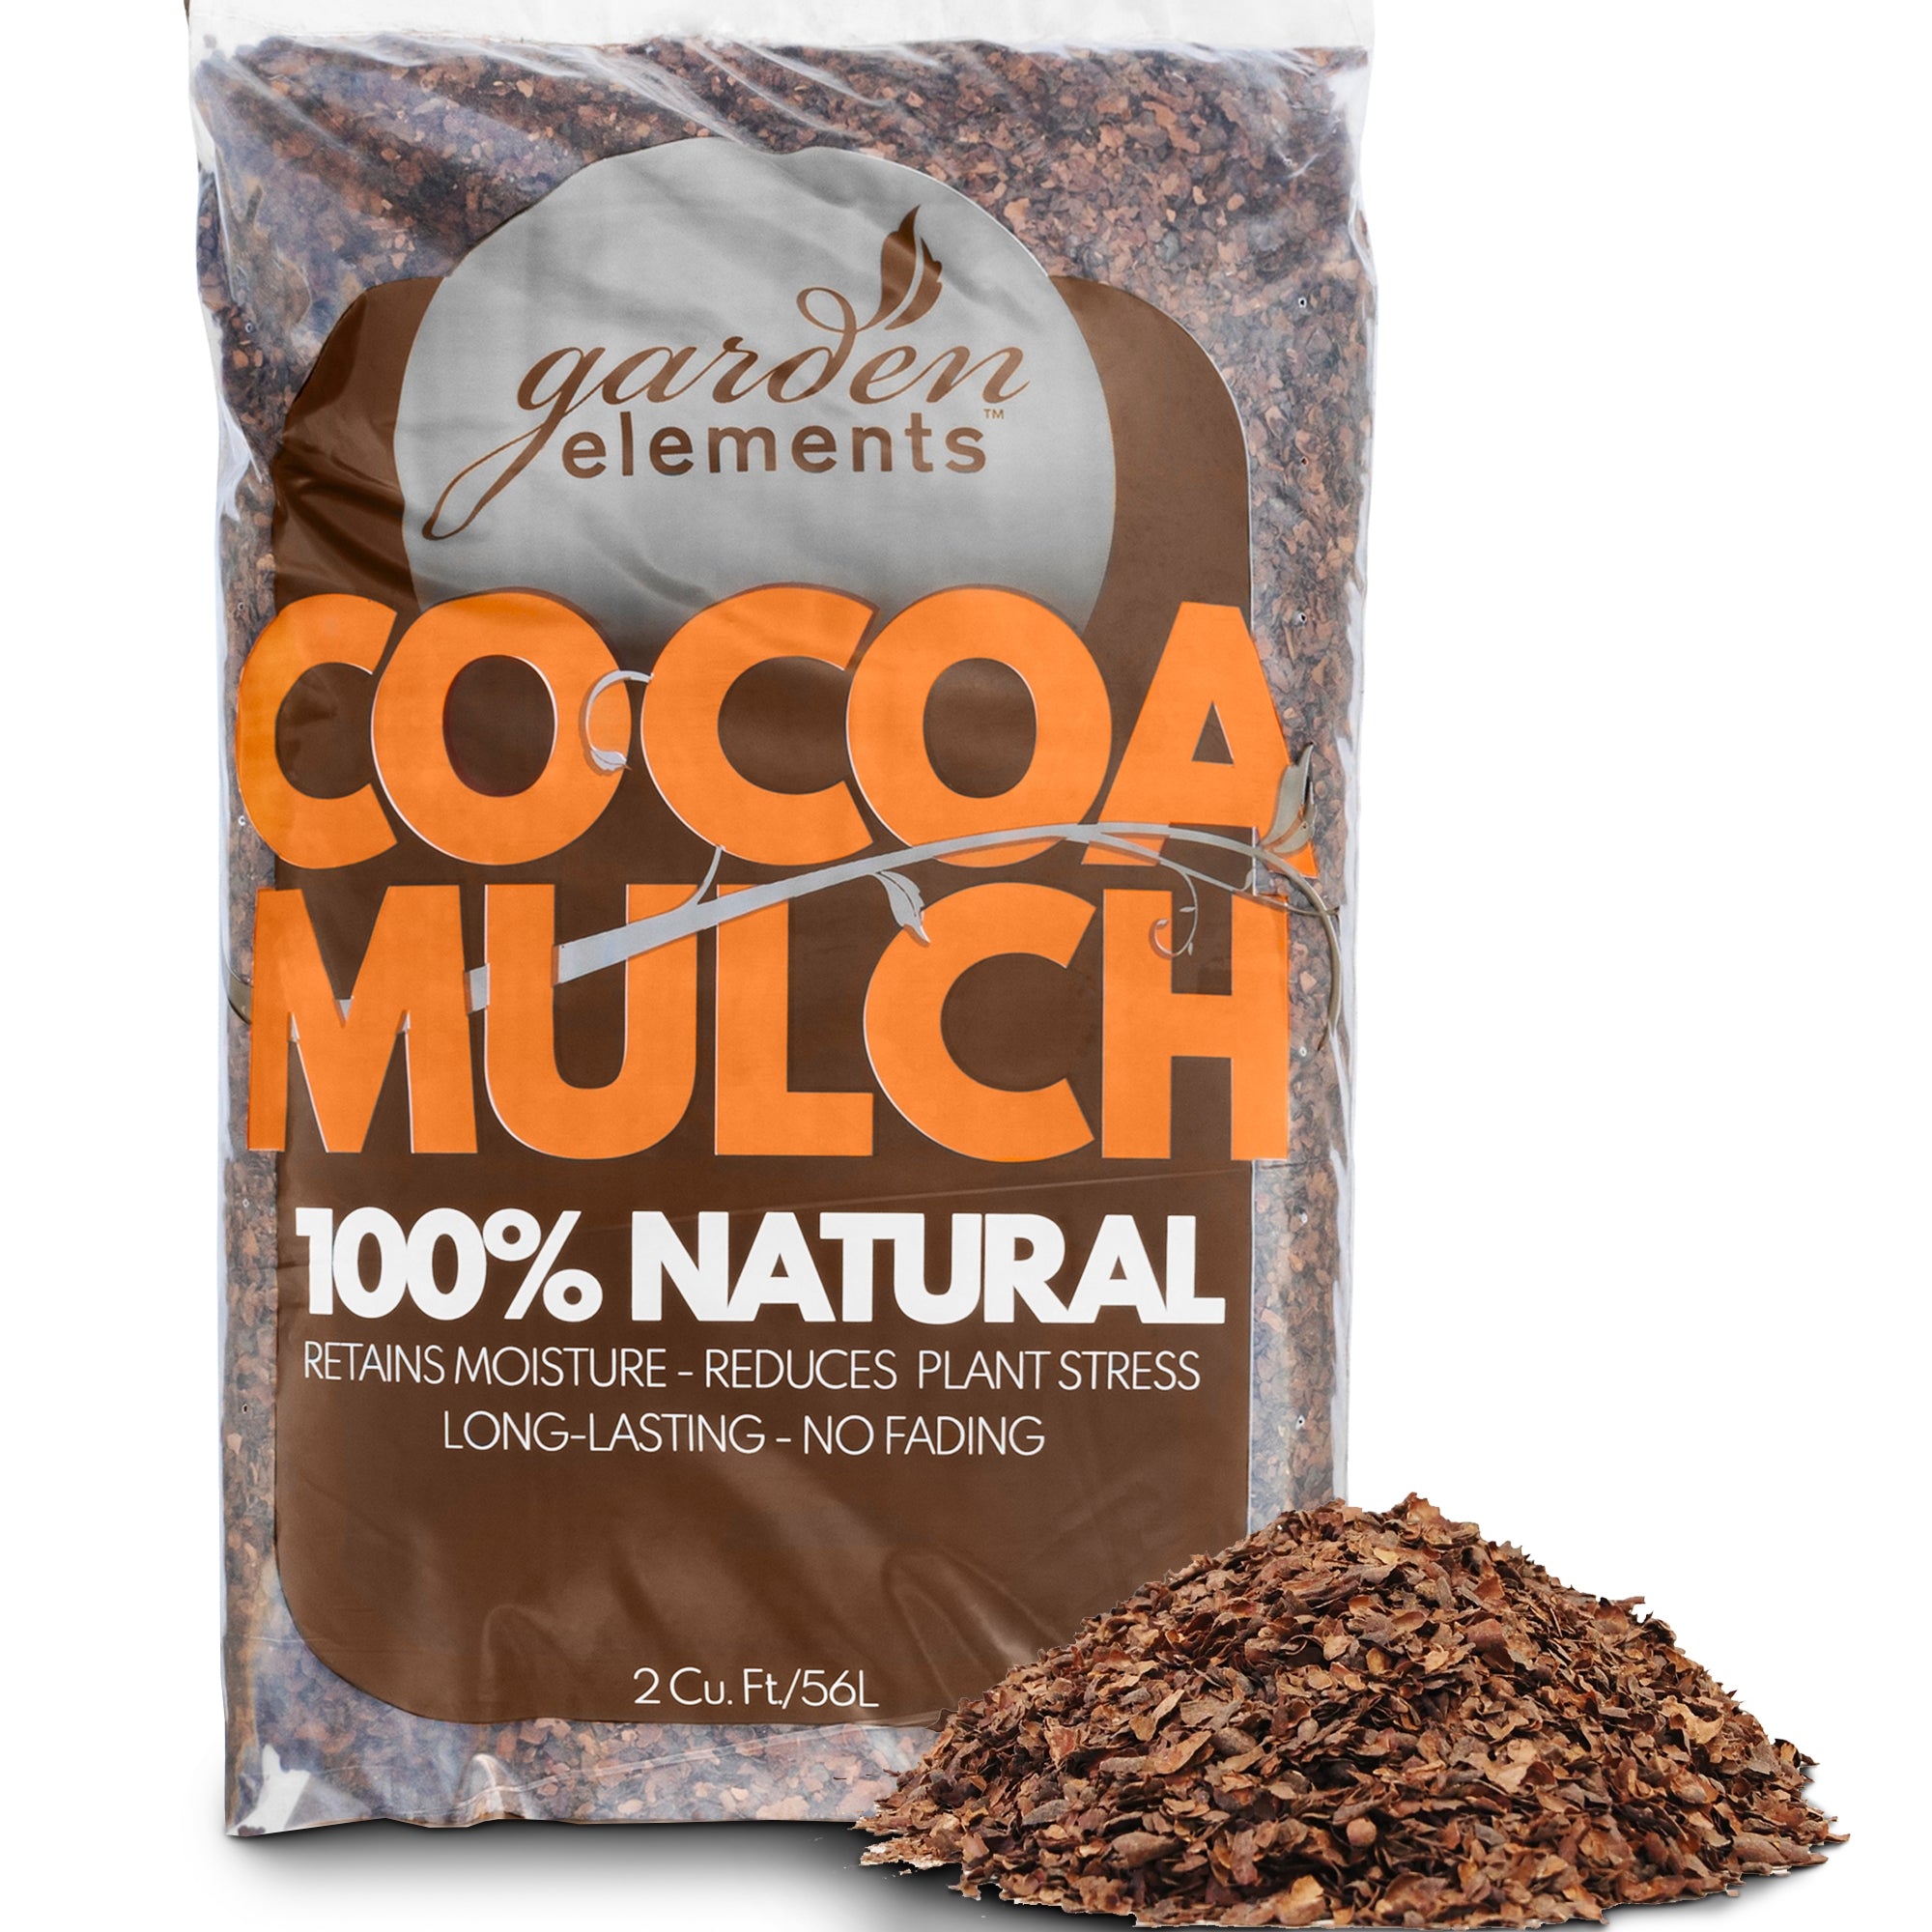 Garden Elements 100% Natural Cocoa Bean Shell Mulch for Gardens, Flower Beds, Potted Plants, Mulching (2 Cubic Foot Bag)